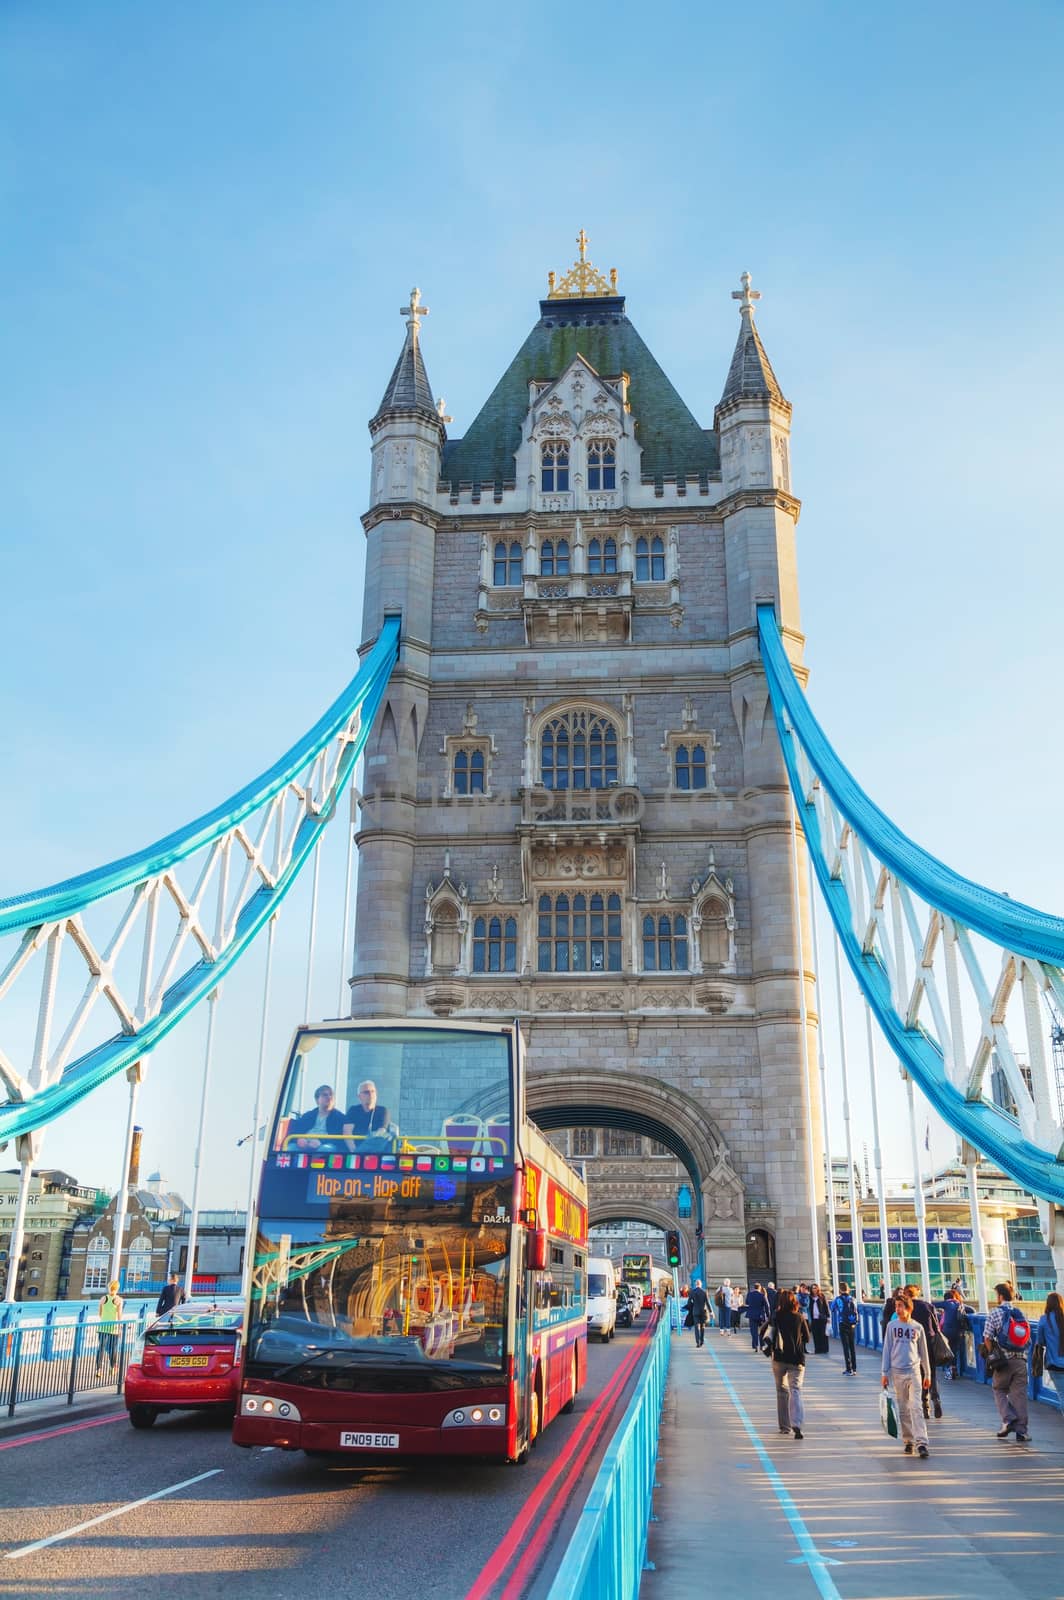 LONDON - APRIL 14: Tower bridge with a touristic double-decker bus on April 14, 2015 in London, UK. It (built 1886–1894) is a combined bascule and suspension bridge in London, England which crosses the River Thames.